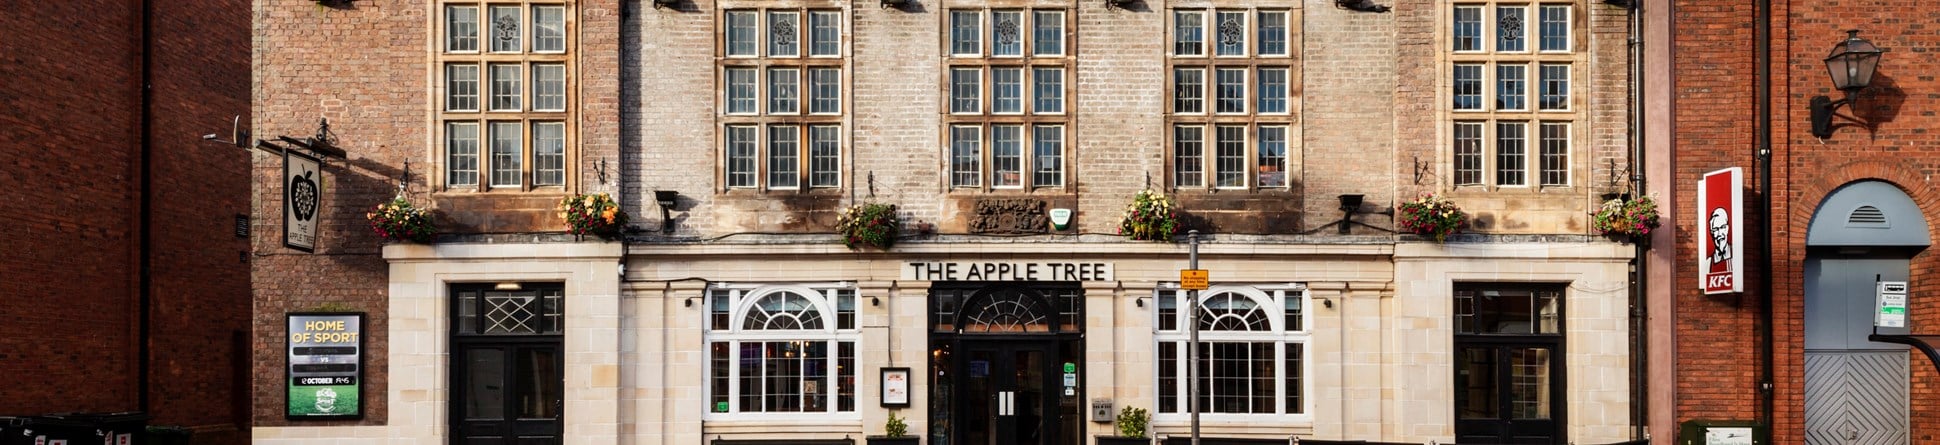 Exterior view of the Apple Tree pub